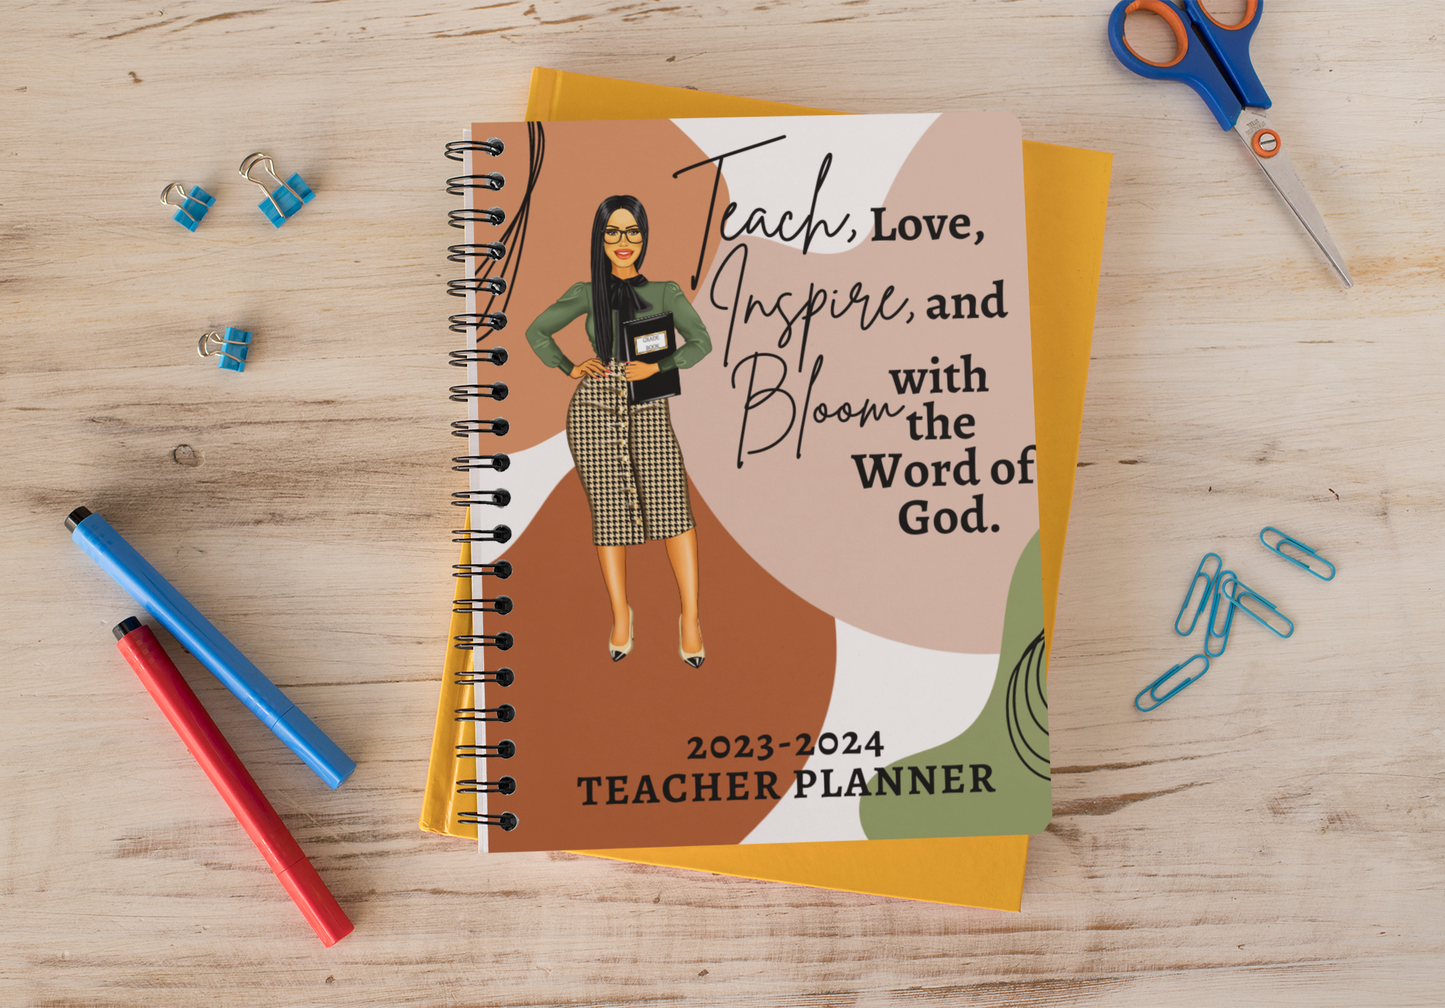 Teacher Planner - Teach, Love, Inspire, And Bloom With The Word Of God